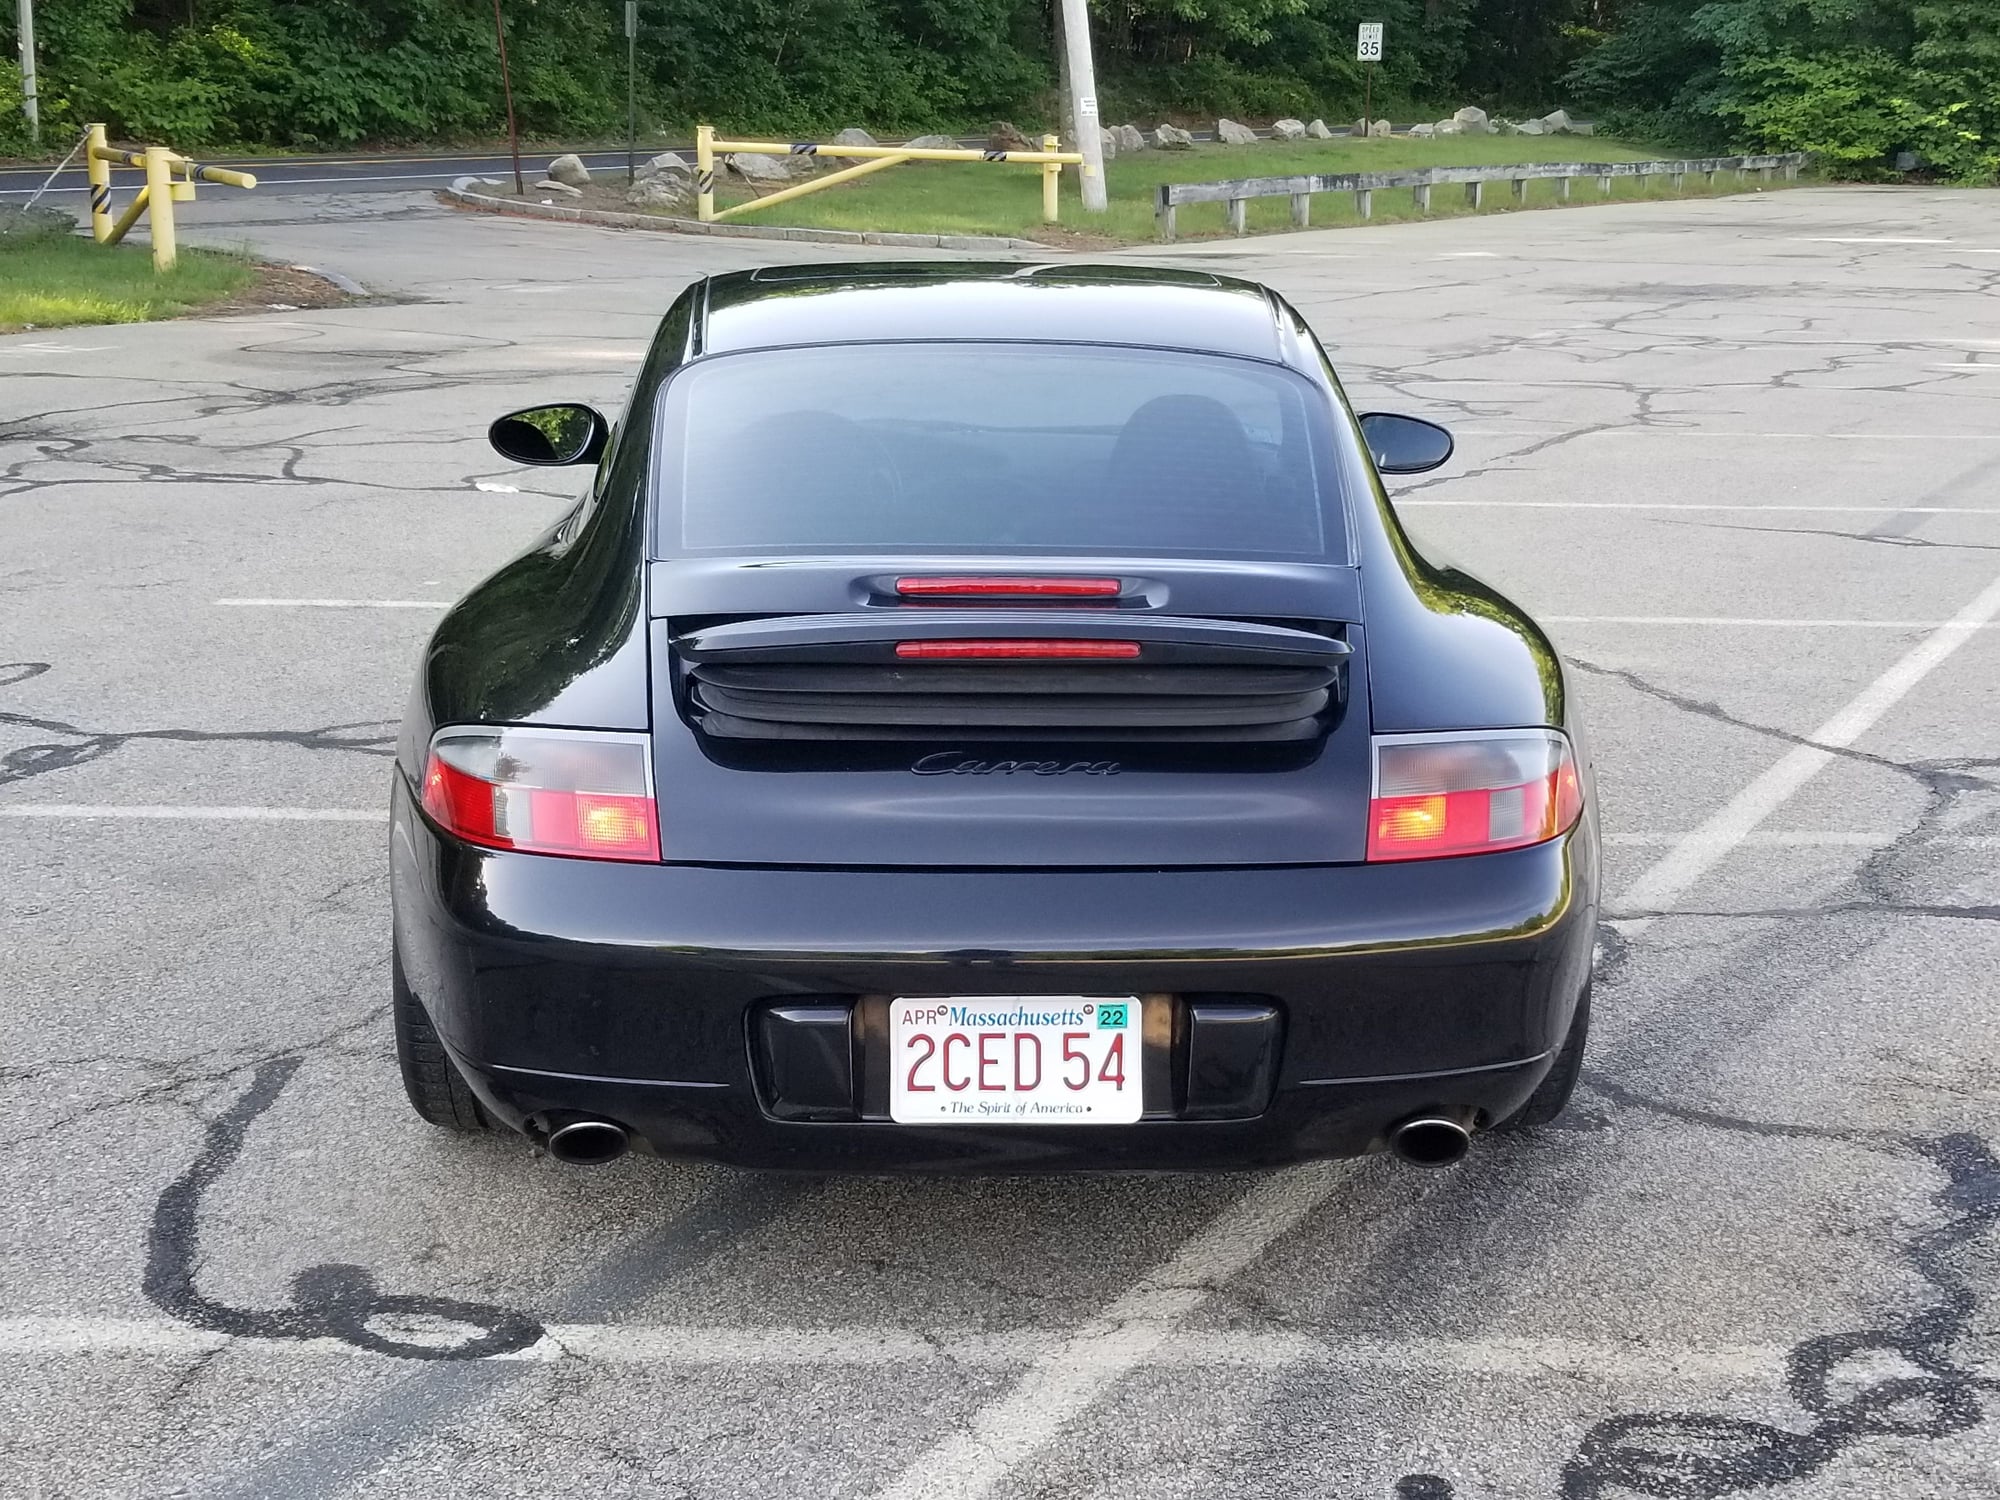 1999 Porsche 911 - Well sorted 1999 C2 - Used - VIN WPOAA2993XS620838 - 105,000 Miles - 6 cyl - 2WD - Manual - Coupe - Black - Boston, MA 02186, United States